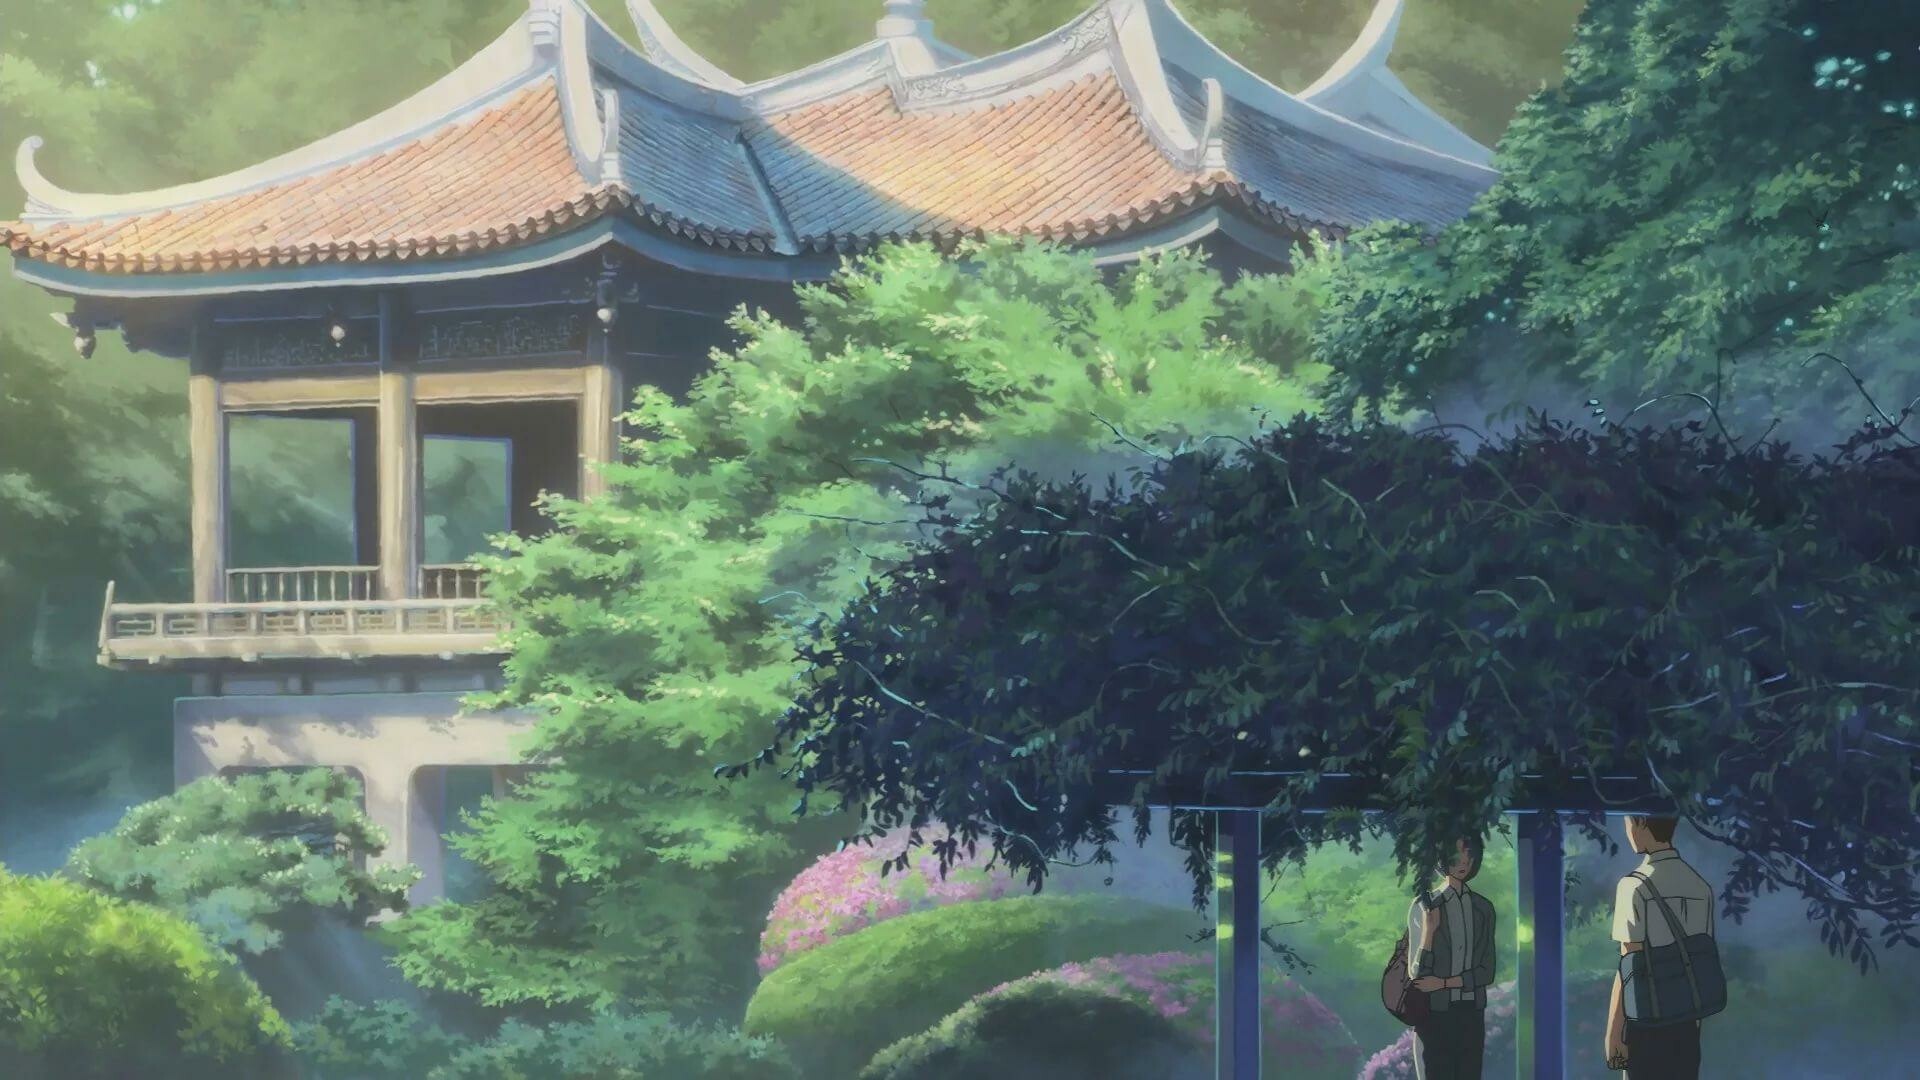 The Garden of Words: A 2013 Japanese anime drama film written, directed and edited by Makoto Shinkai. 1920x1080 Full HD Wallpaper.